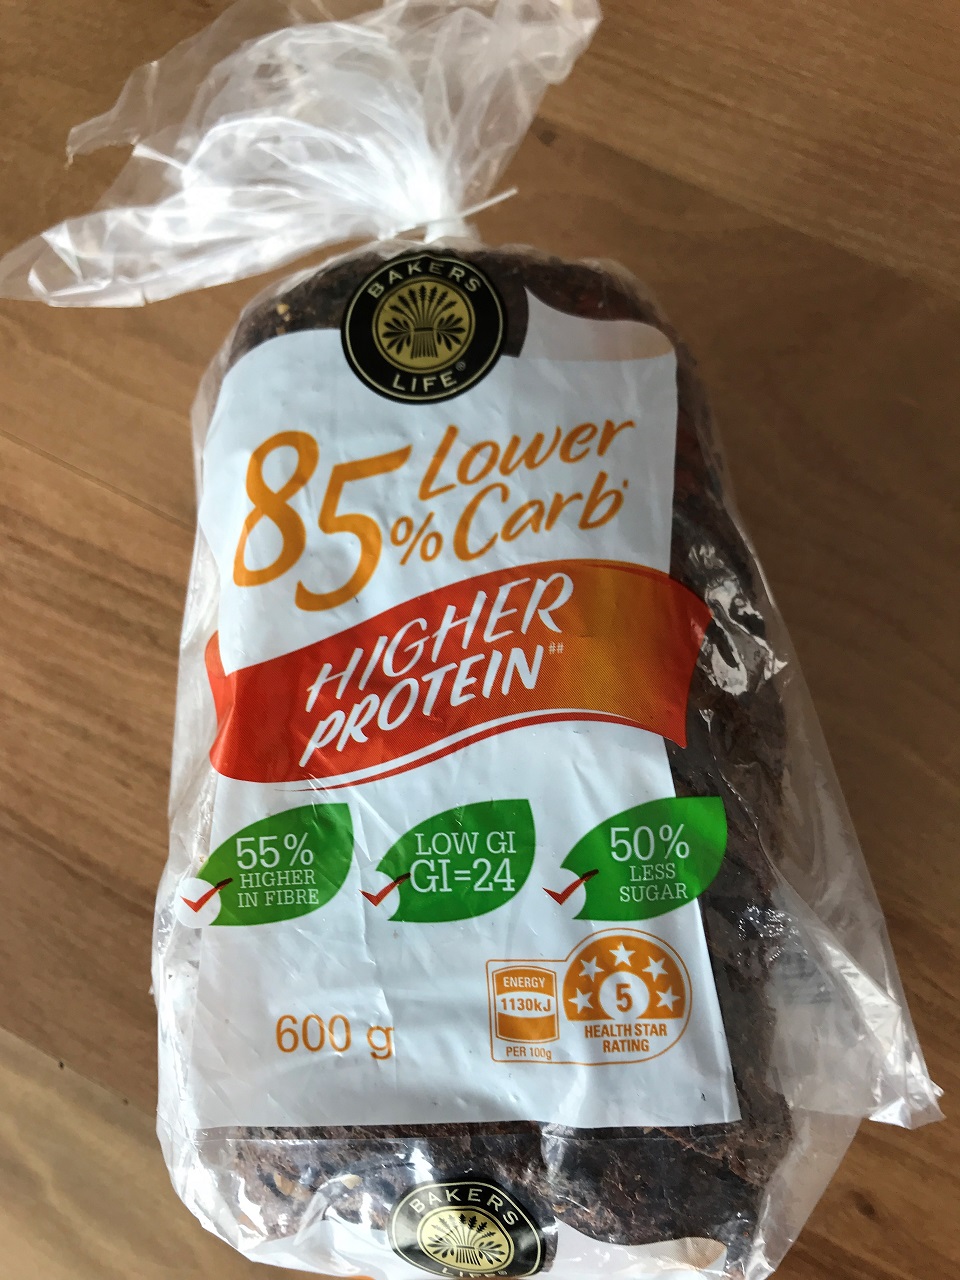 Bakers Life 85 oer cent lower carb bread